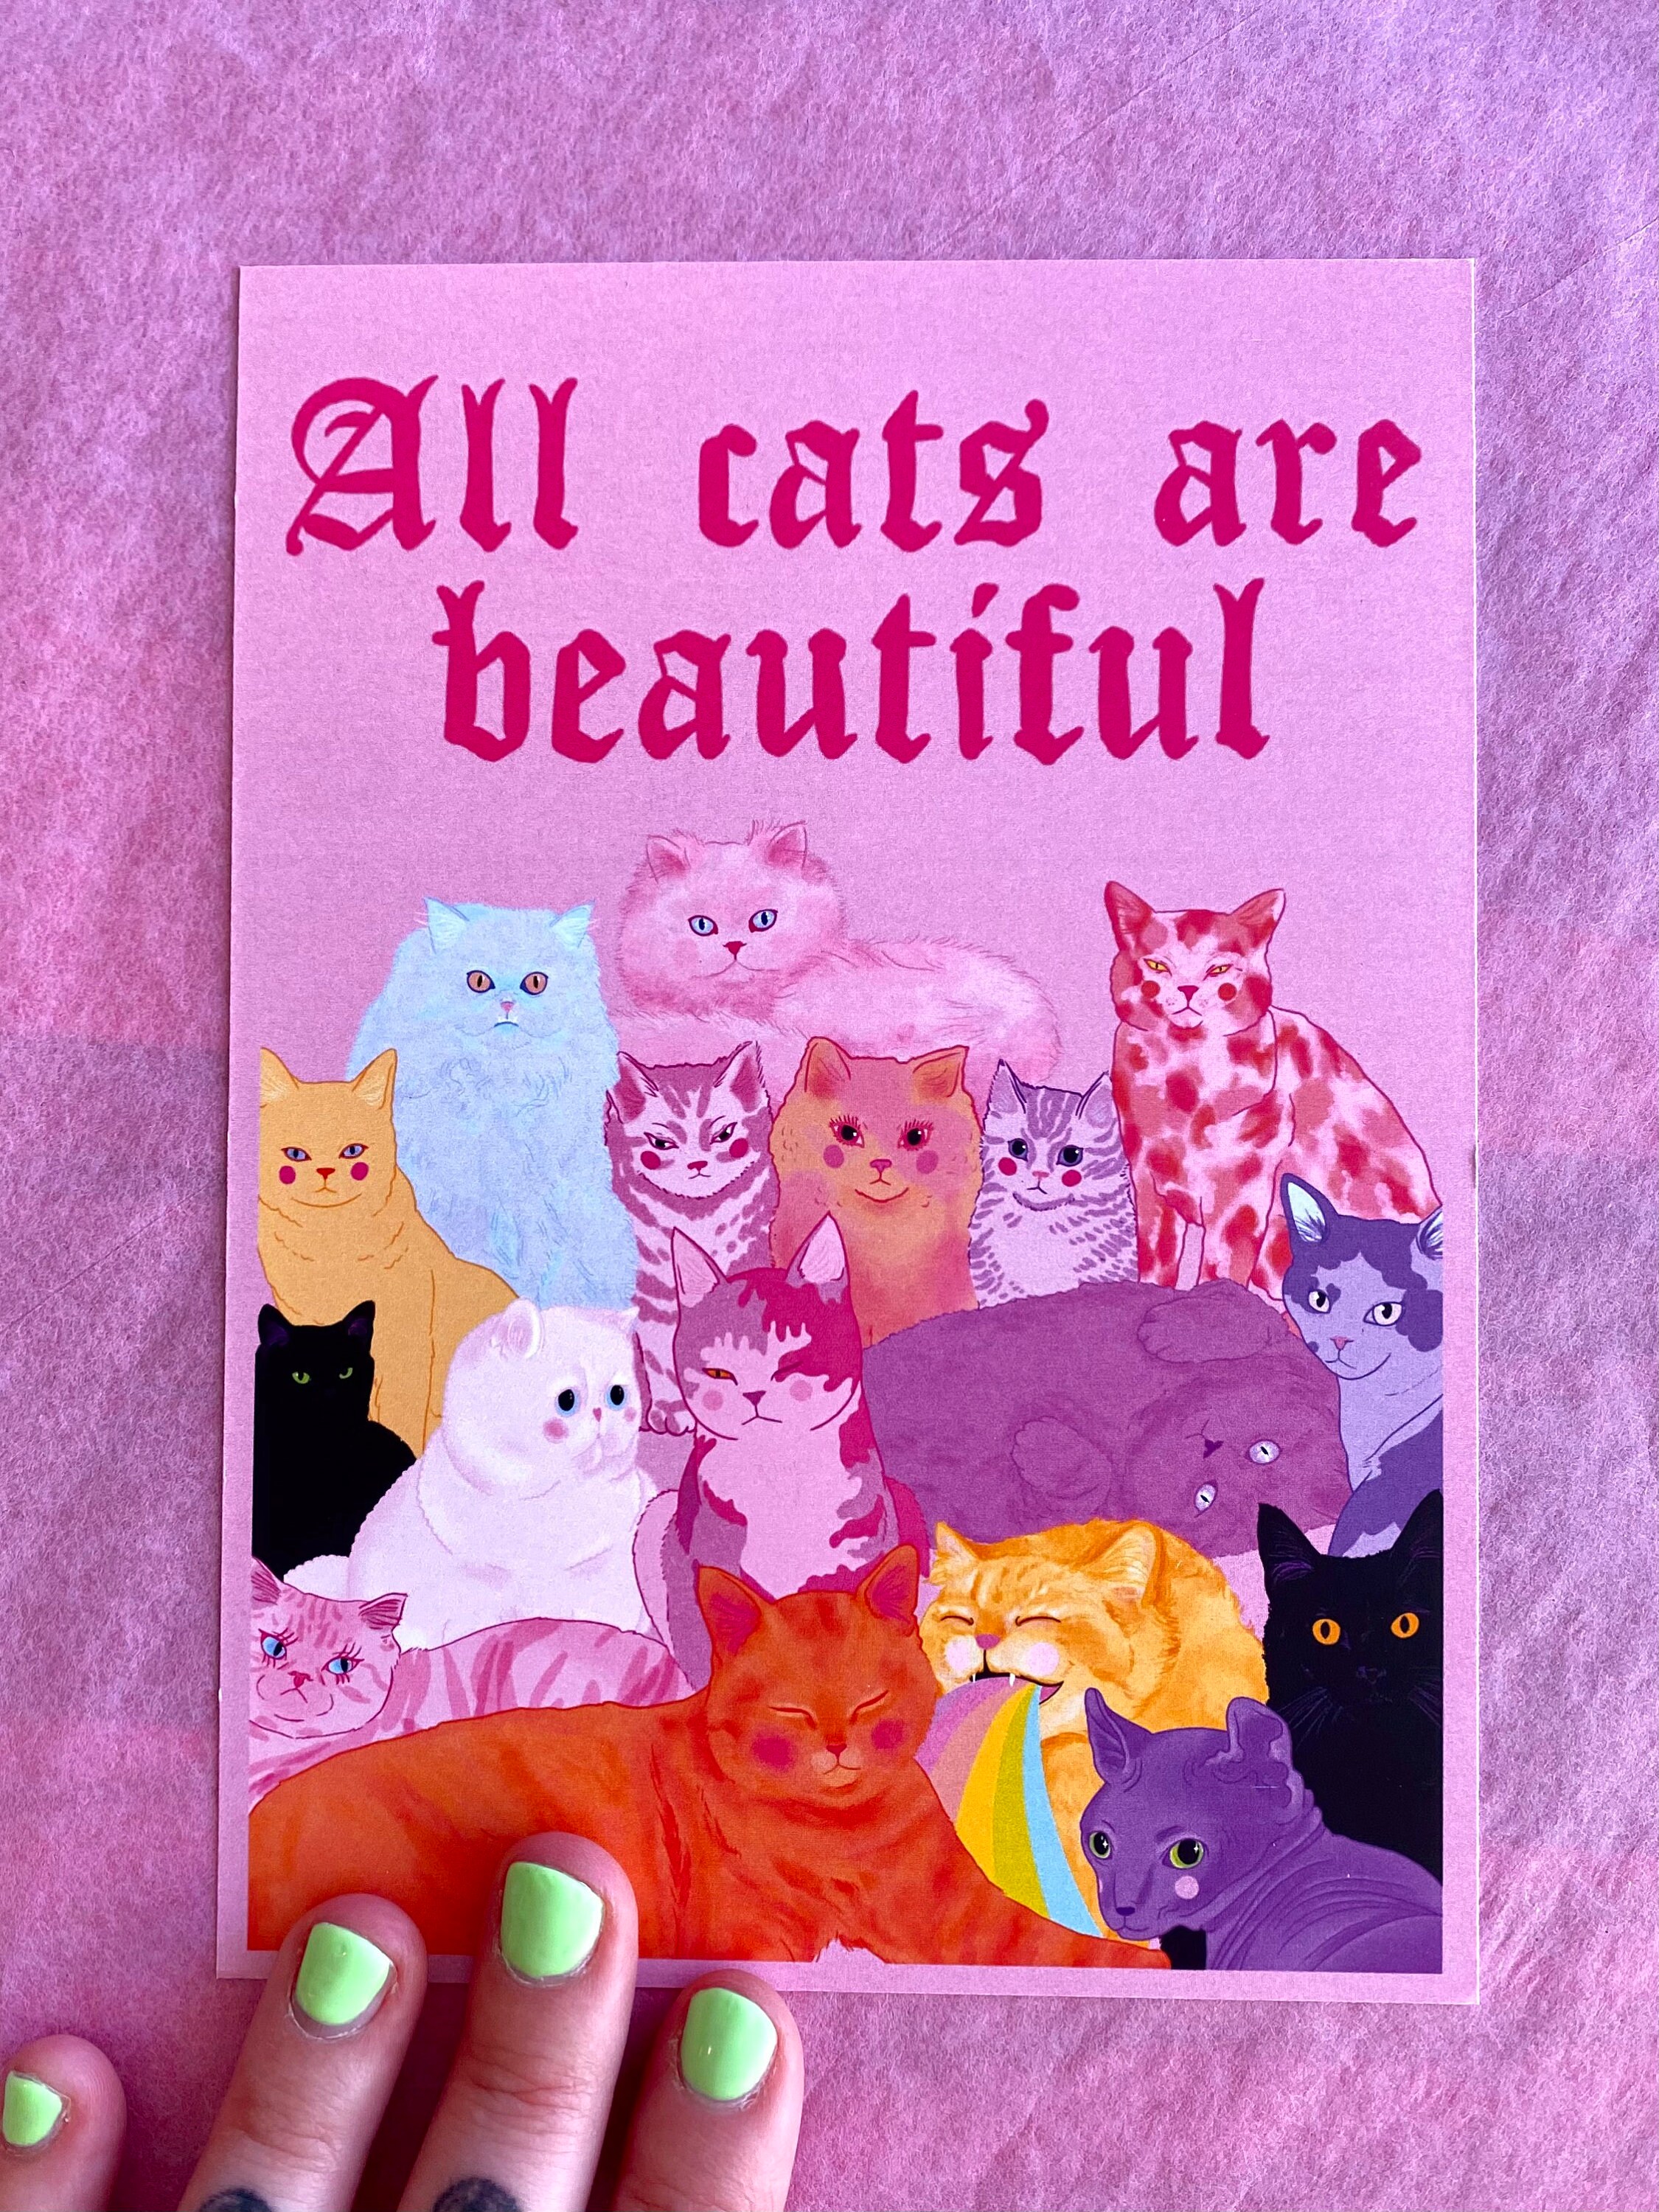 The Cats Cats Cats Sticker Book – The Pretty Pink Rooster Boutique